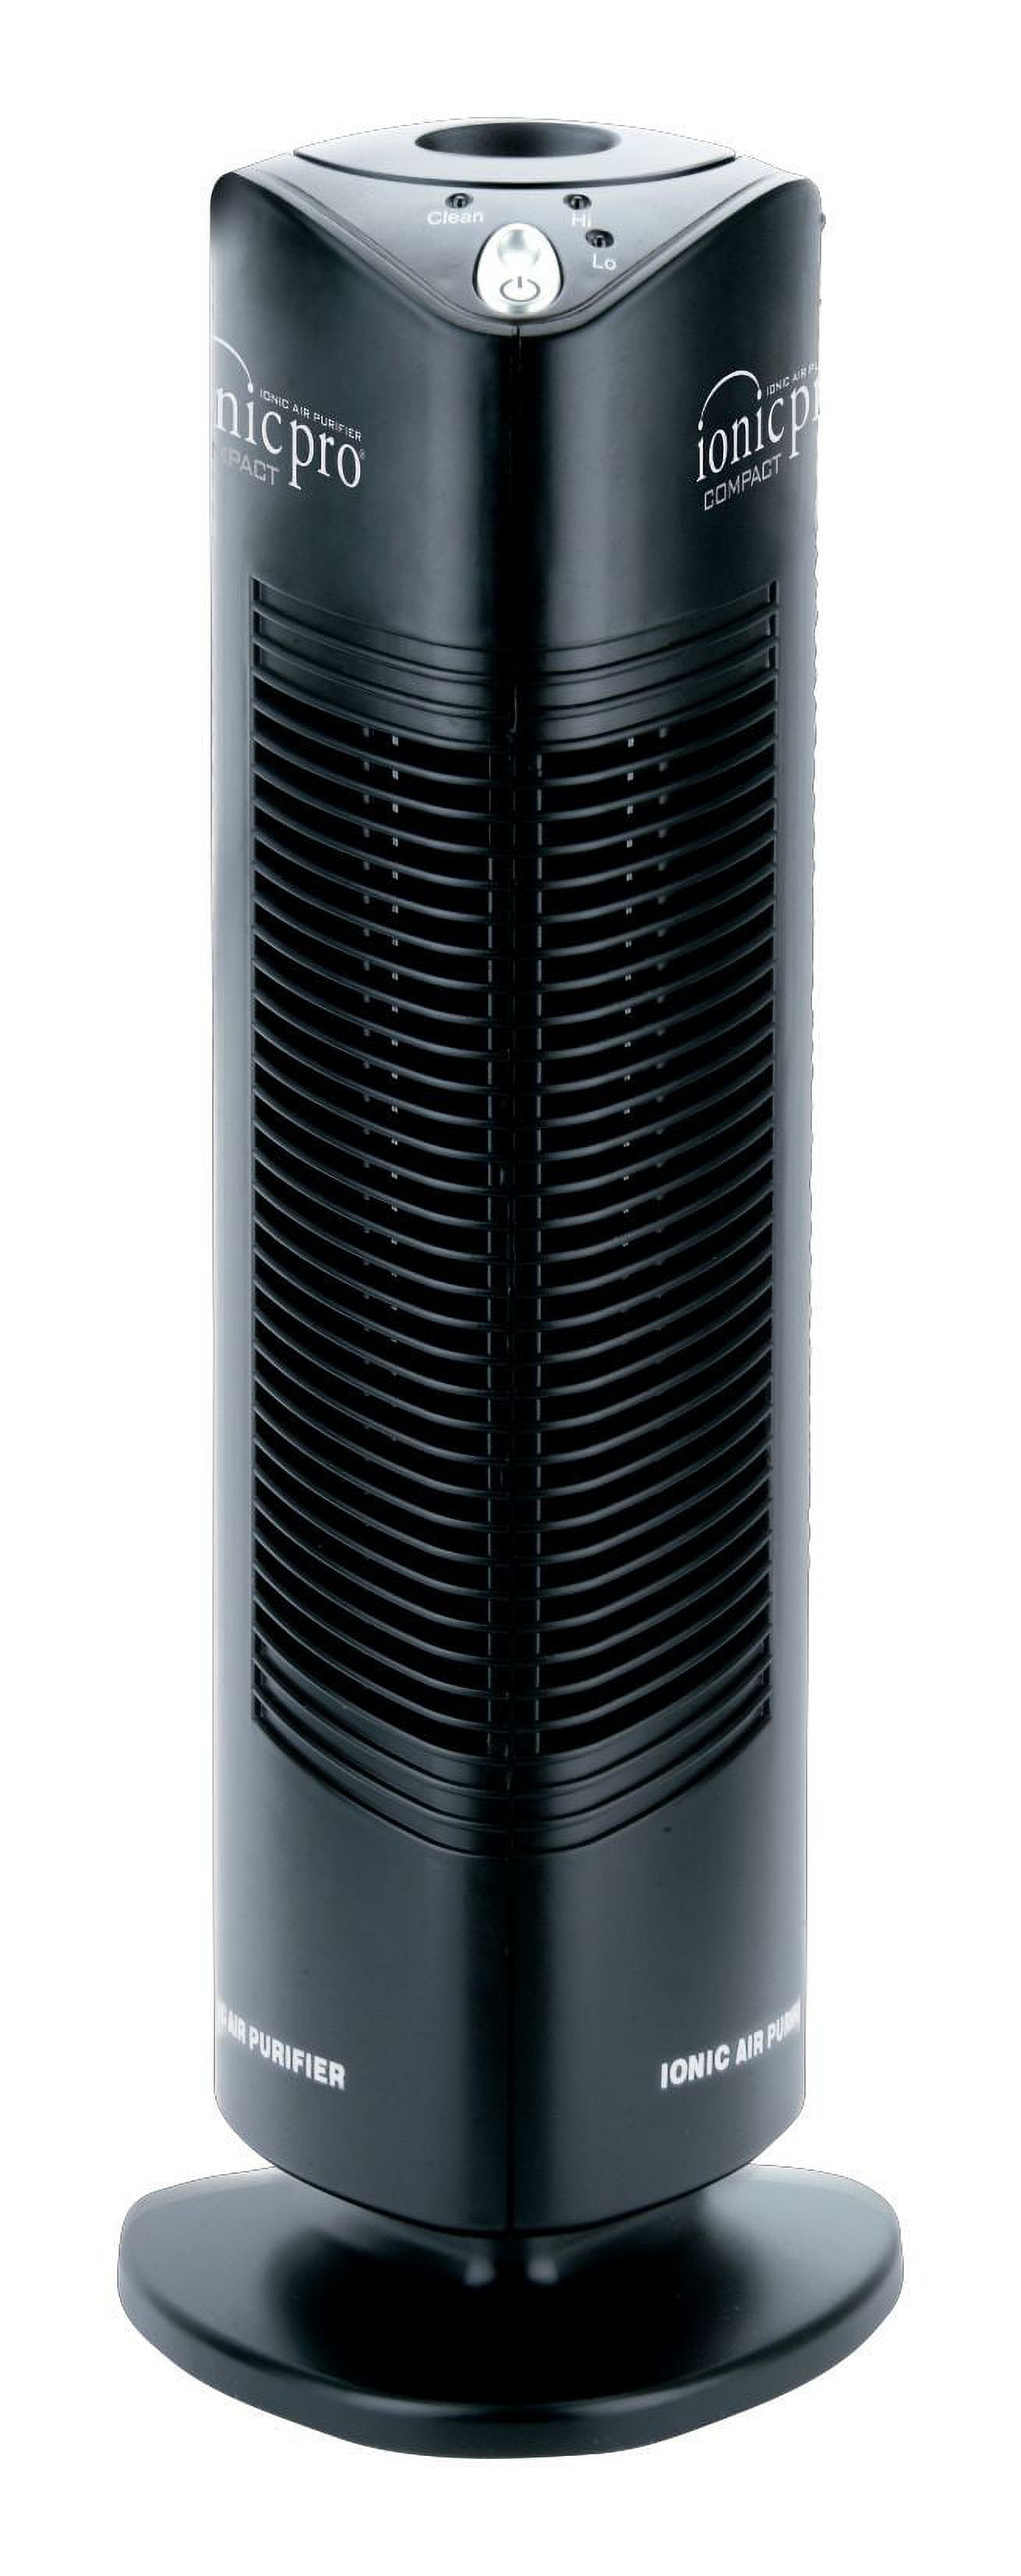 Envion Blade Filter Ionic Pro Compact Air Purifier for Small Rooms (Model CA200, Analog Controls , Covers 90 sq.ft), Black - image 4 of 11